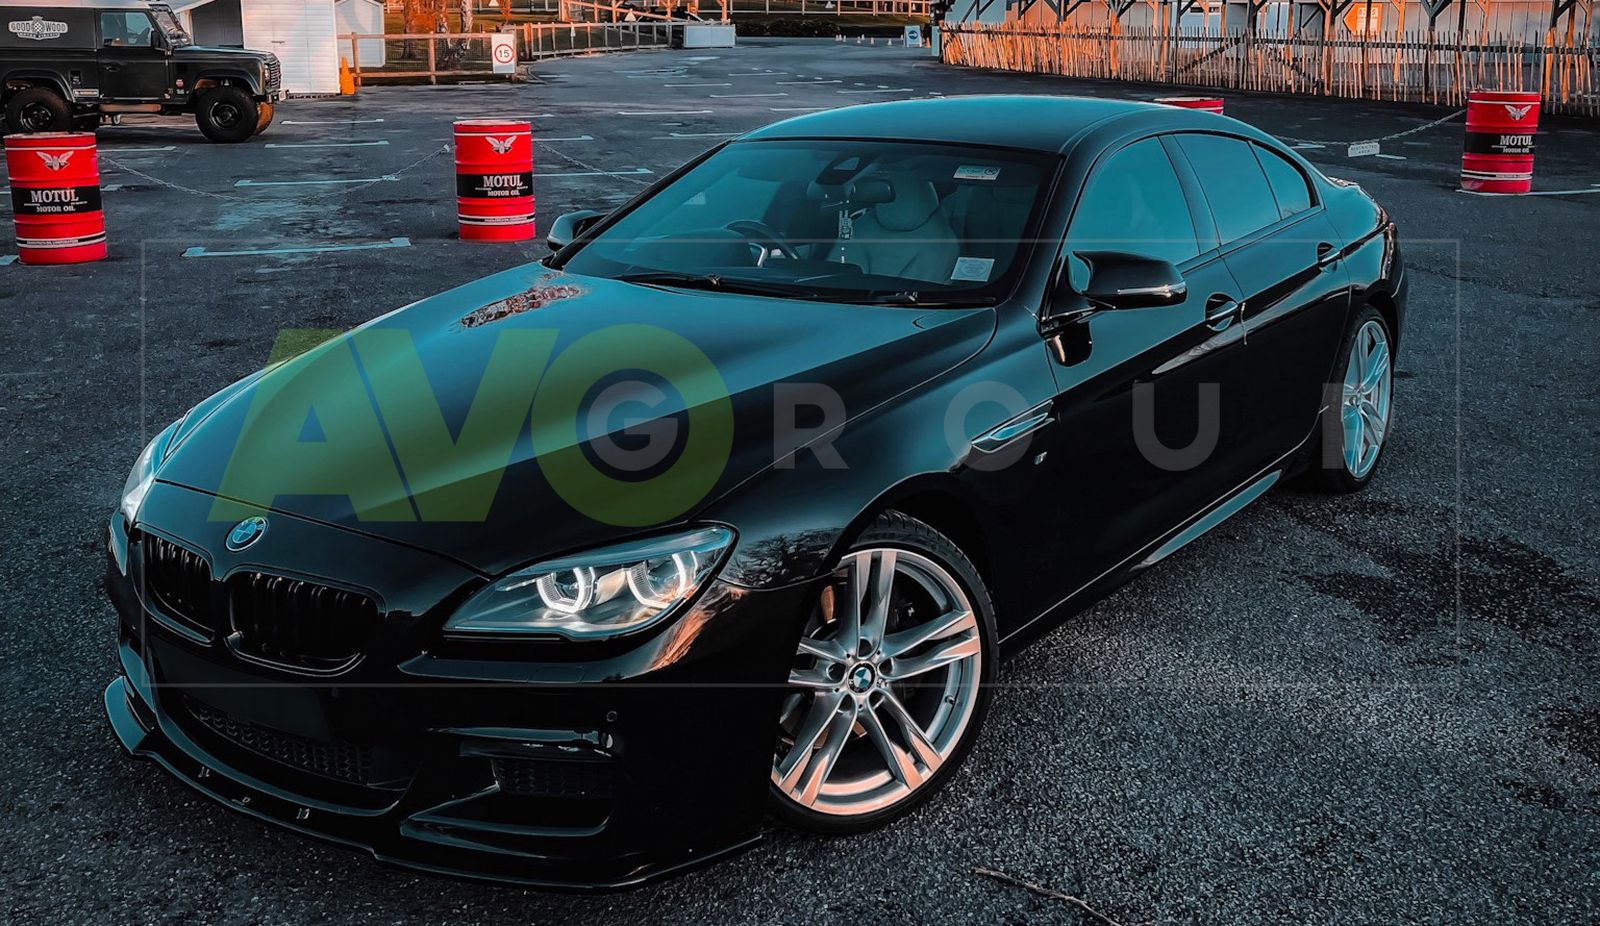 M Style piano black mirror covers set for BMW 6 F06 / F12 / F13 2015-2018